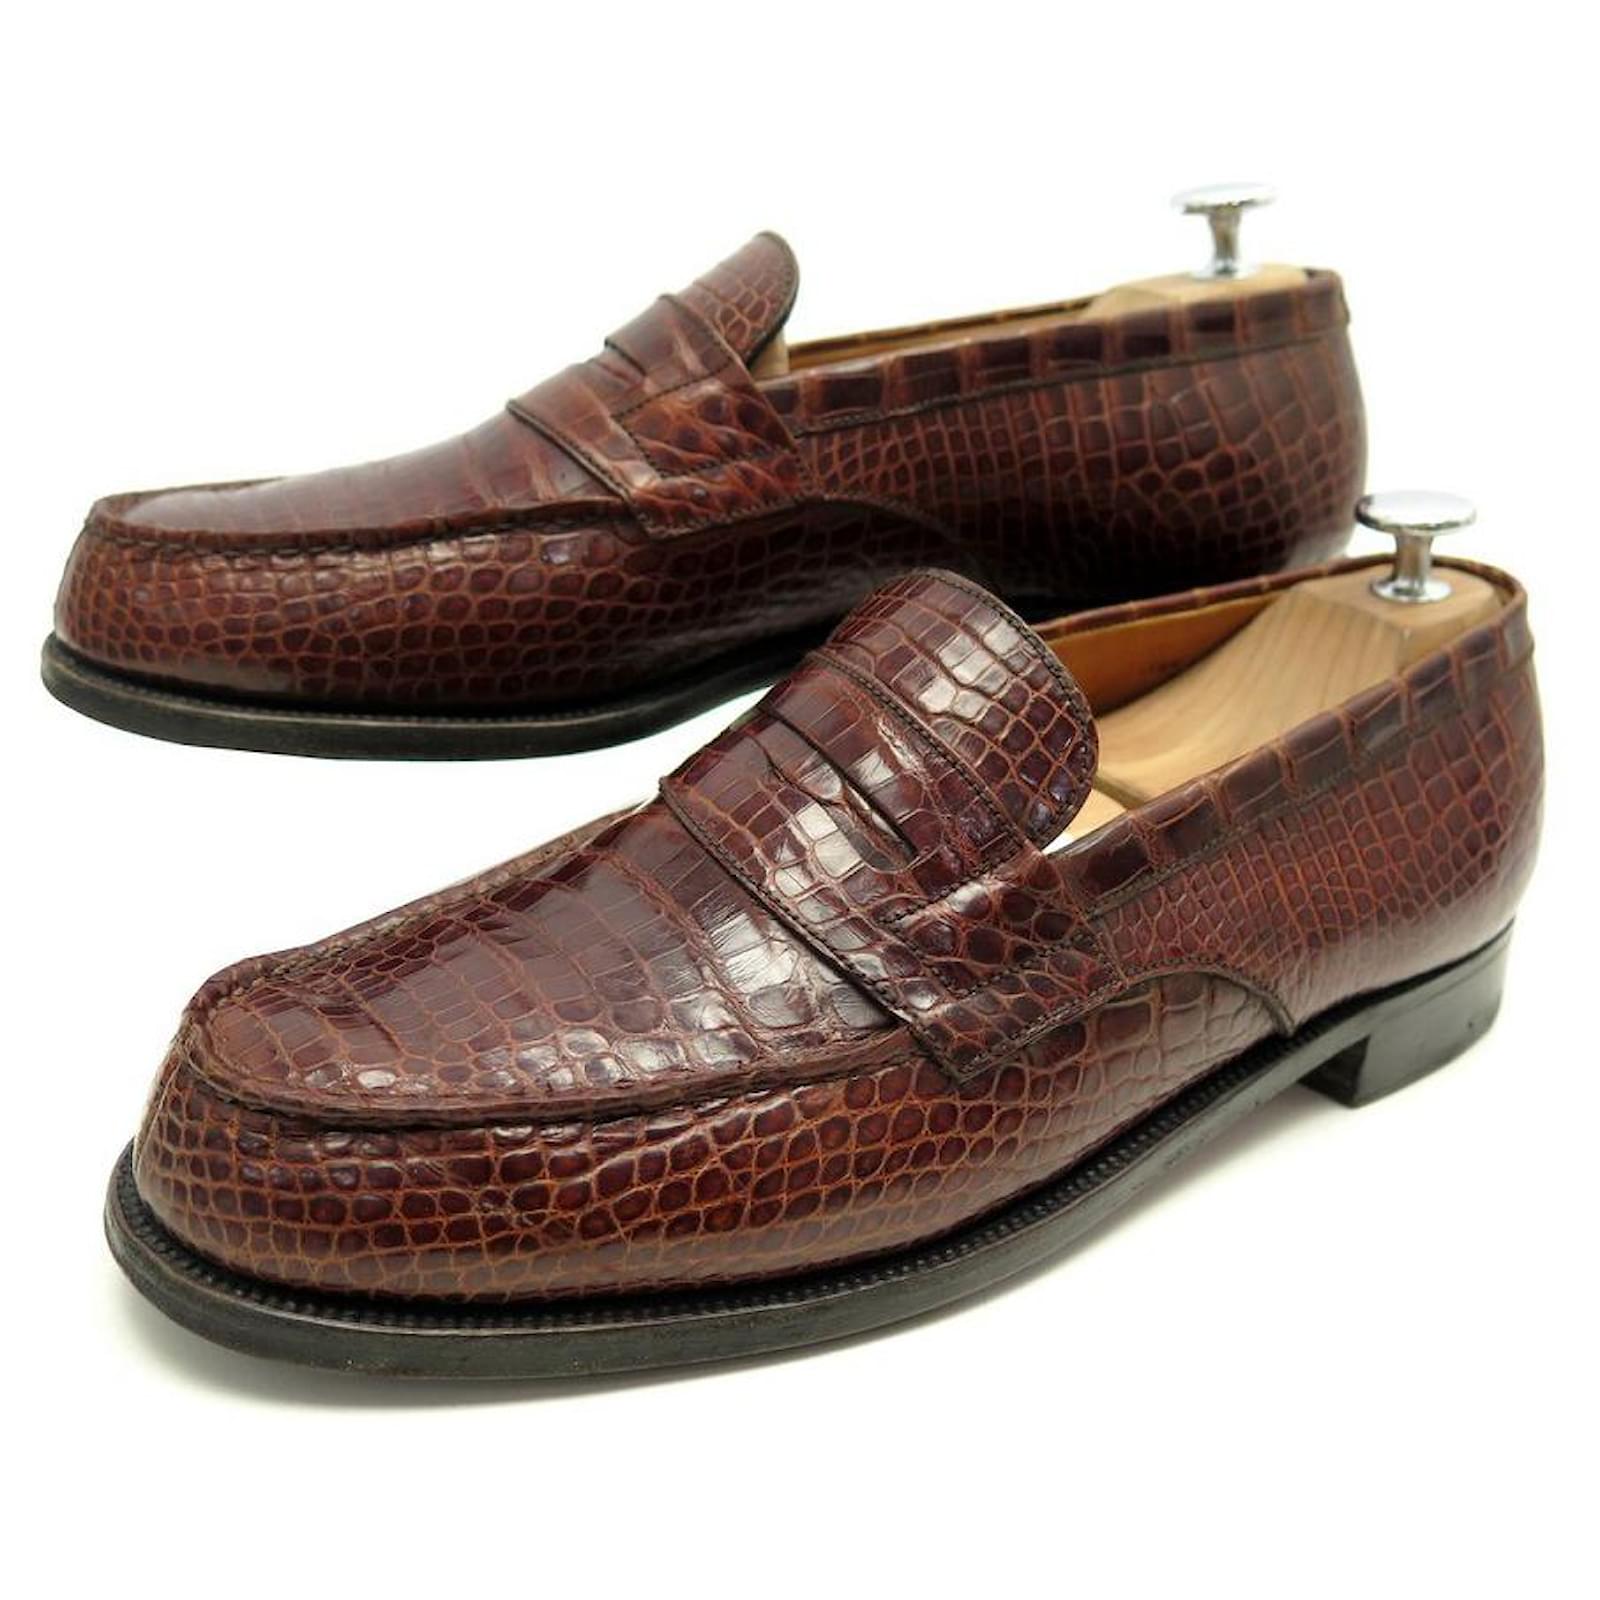 JM WESTON SHOES 180 7C 41 BROWN CROCODILE LEATHER LOAFERS LOAFERS ...